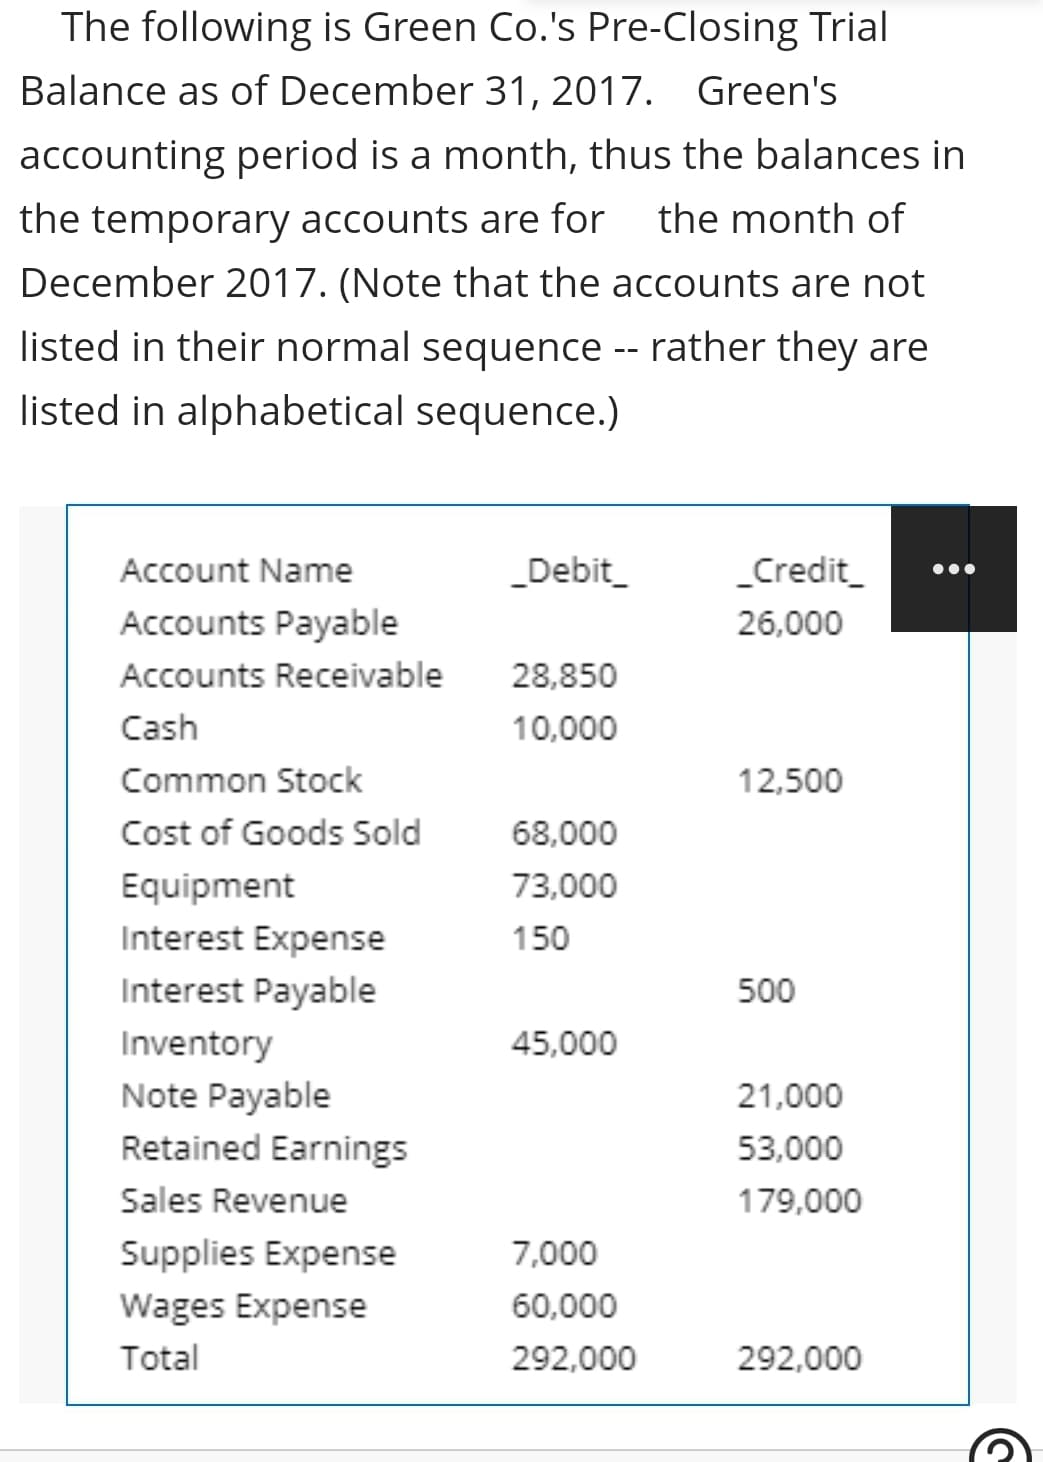 The following is Green Co.'s Pre-Closing Trial
Balance as of December 31, 2017. Green's
accounting period is a month, thus the balances in
the temporary accounts are for
the month of
December 2017. (Note that the accounts are not
listed in their normal sequence -- rather they are
listed in alphabetical sequence.)
Account Name
_Debit_
_Credit_
Accounts Payable
26,000
Accounts Receivable
28,850
Cash
10,000
Common Stock
12,500
Cost of Goods Sold
68,000
Equipment
73,000
Interest Expense
150
Interest Payable
500
Inventory
45,000
Note Payable
21,000
Retained Earnings
53,000
Sales Revenue
179,000
Supplies Expense
7,000
Wages Expense
60,000
Total
292,000
292,000
